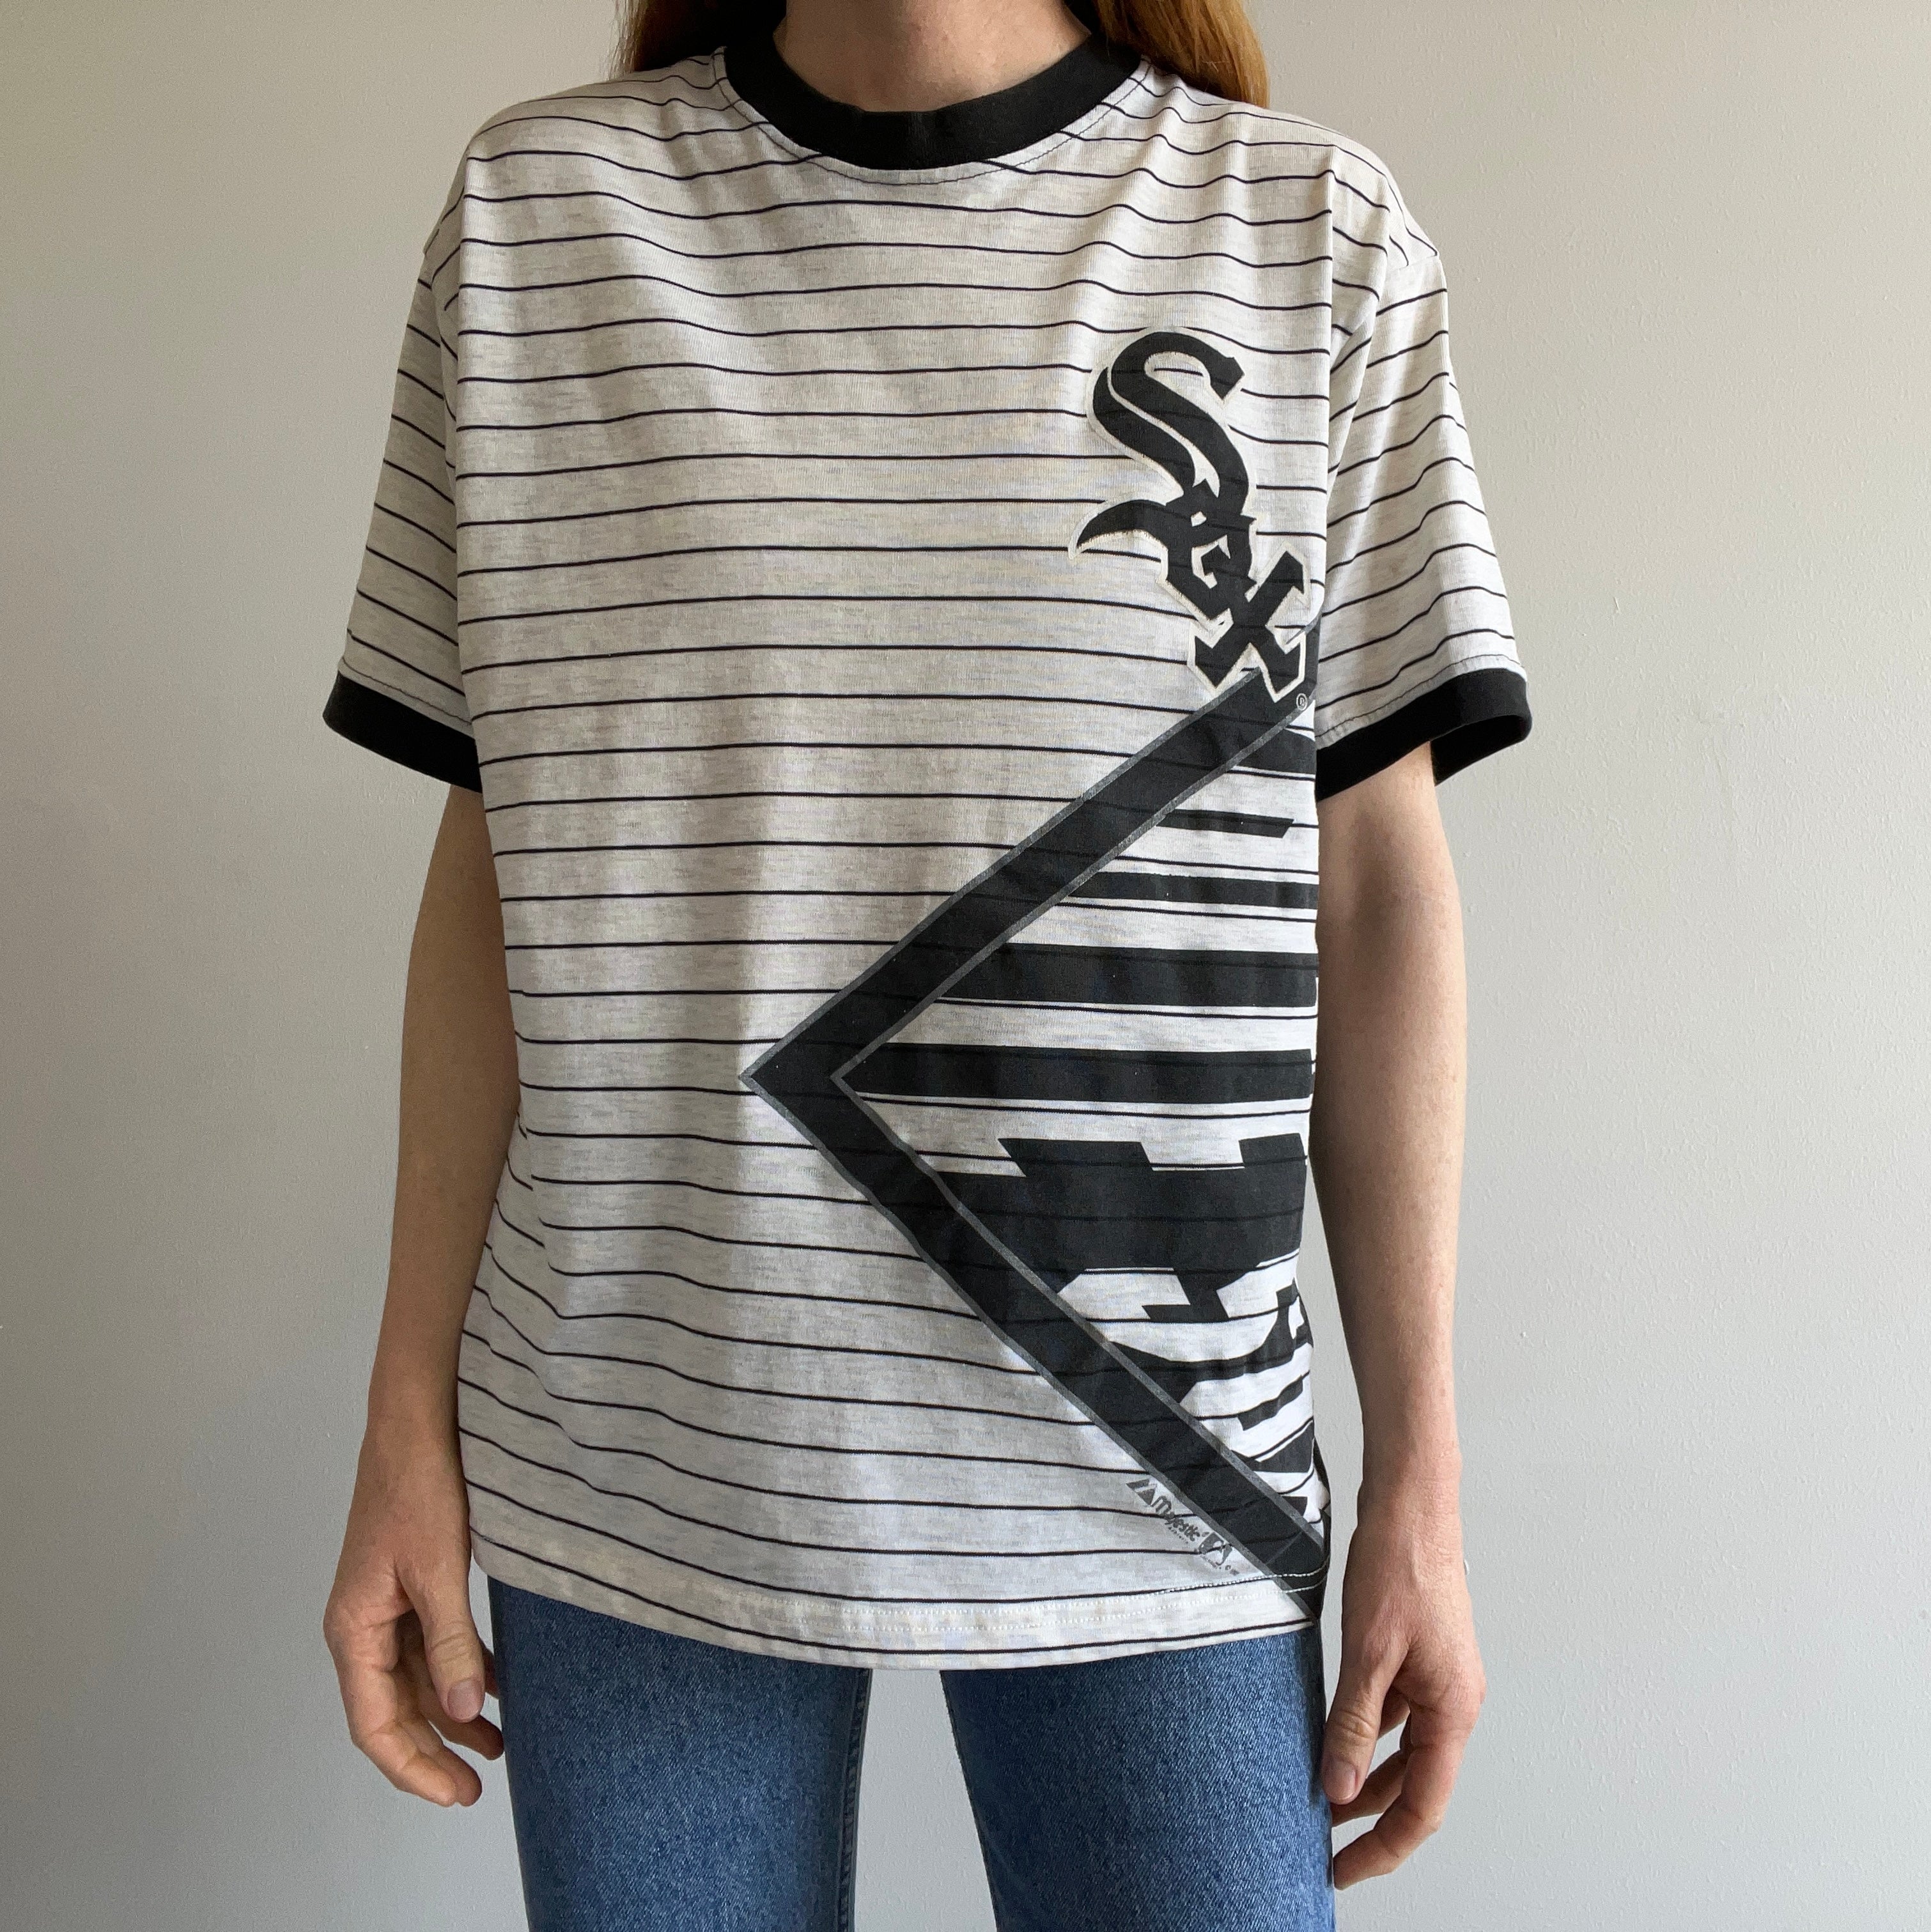 1992 White Sox T-Shirt by Majestic - WOW